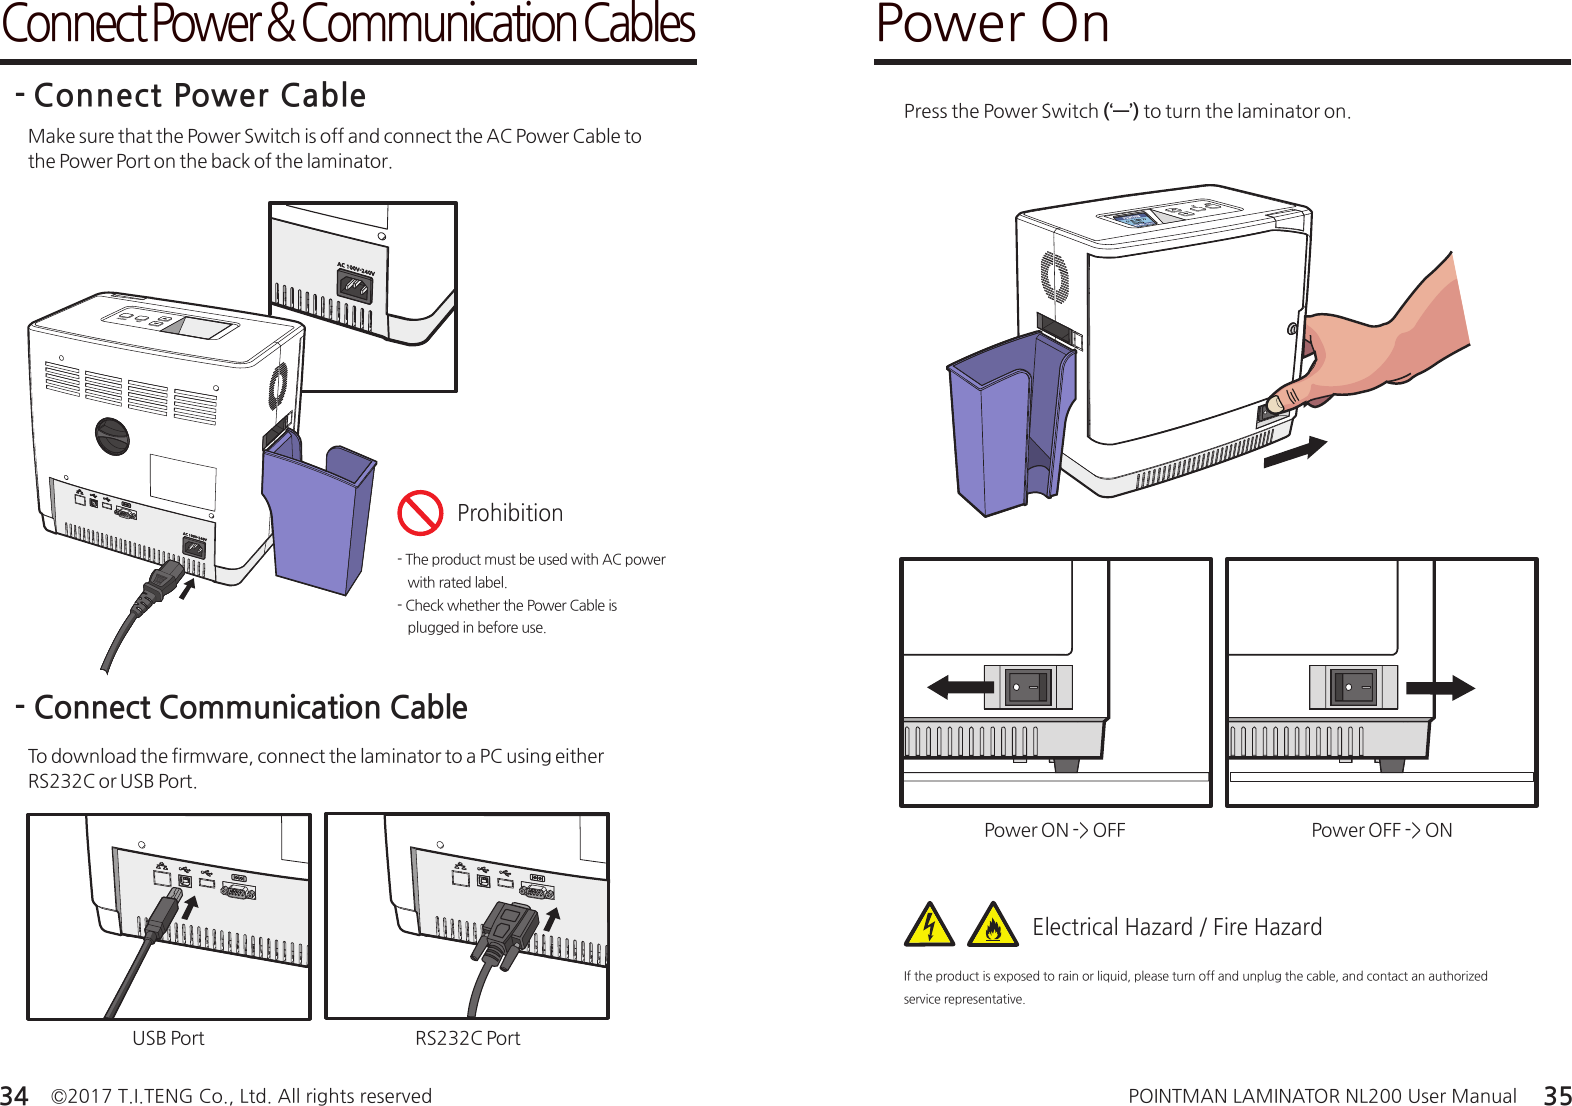 ©2017 T.I.TENG Co., Ltd. All rights reserved POINTMAN LAMINATOR NL200 User Manual34 35Make sure that the Power Switch is off and connect the AC Power Cable to the Power Port on the back of the laminator.- Connect Power CableConnect Power &amp; Communication Cables- The product must be used with AC power    with rated label.- Check whether the Power Cable is    plugged in before use.ProhibitionTo download the firmware, connect the laminator to a PC using either RS232C or USB Port. - Connect Communication CableRS232C PortUSB PortPower OnPress the Power Switch (‘―’) to turn the laminator on.Power ON -&gt; OFF Power OFF -&gt; ONIf the product is exposed to rain or liquid, please turn off and unplug the cable, and contact an authorized service representative.Electrical Hazard / Fire Hazard